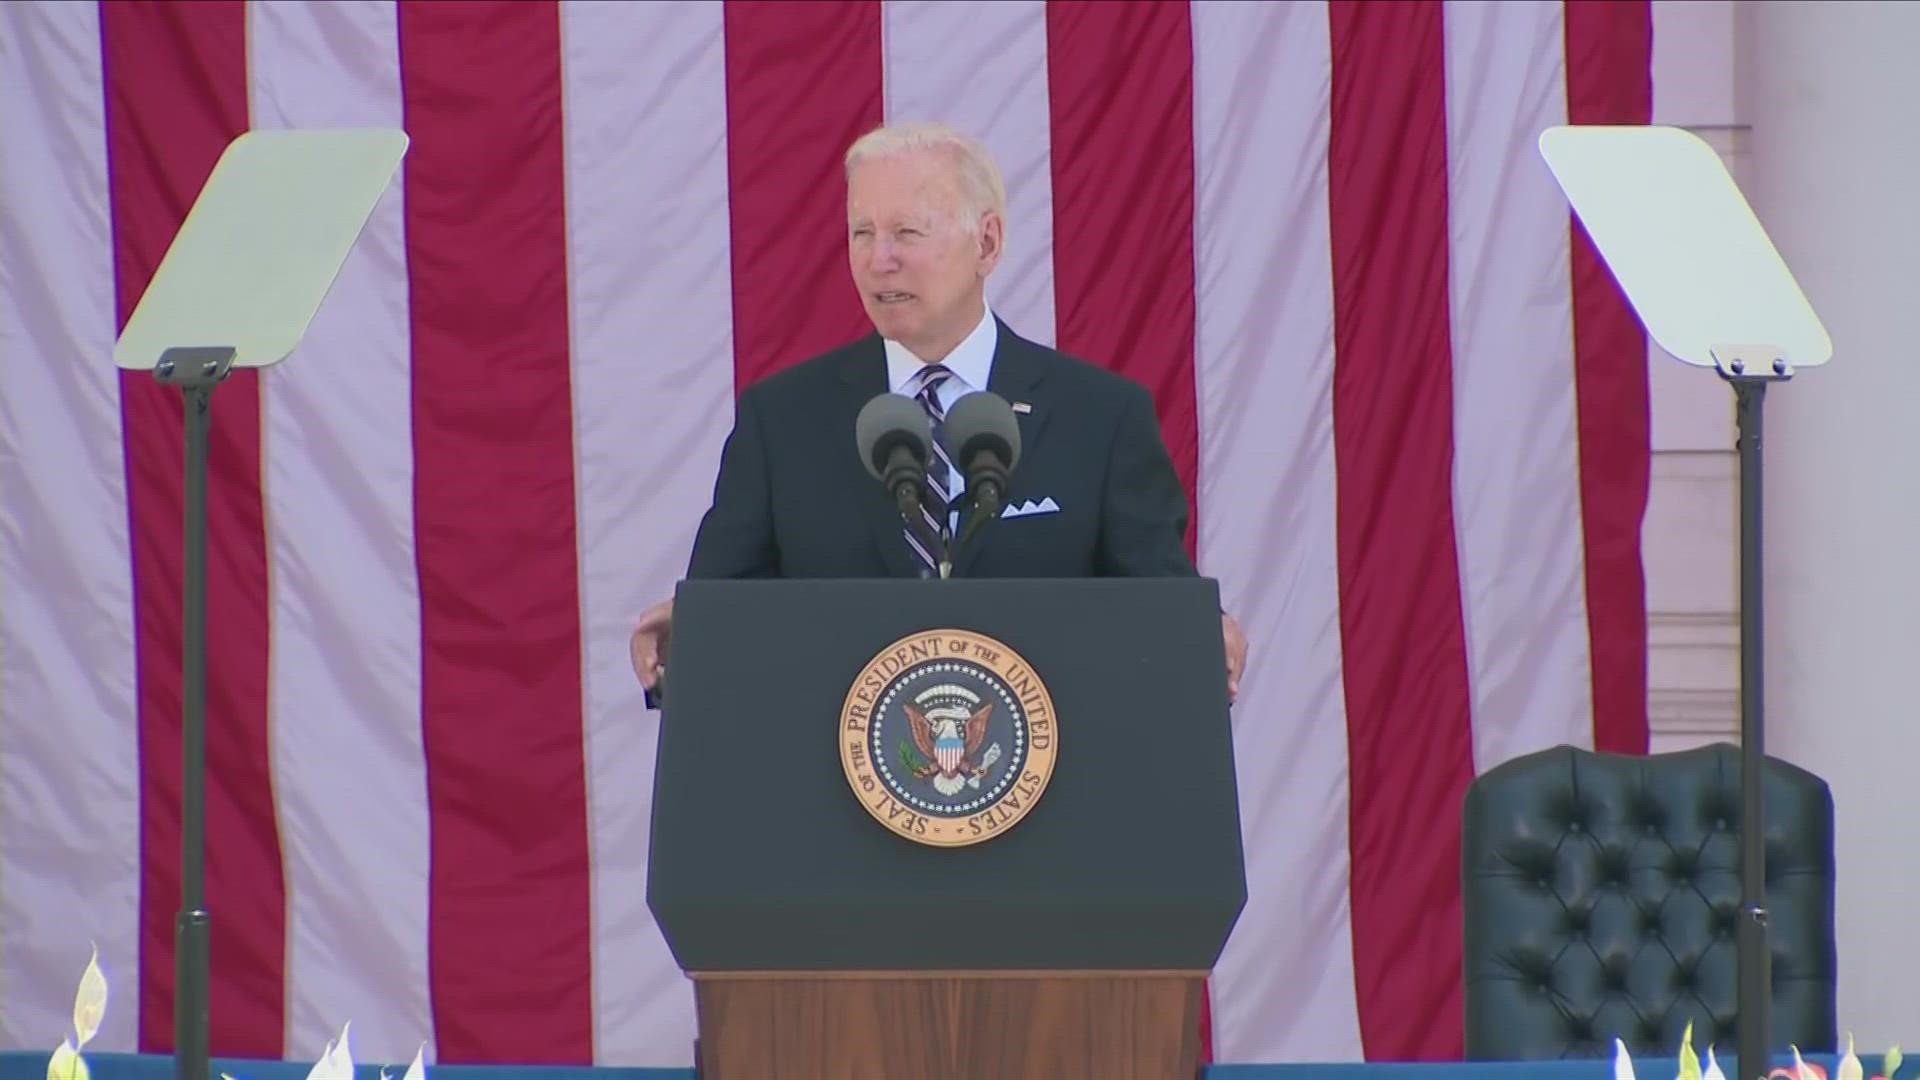 Delivering remarks honoring fallen servicemembers, President Biden said “Memorial Day is always a day where pain and pride are mixed together.”